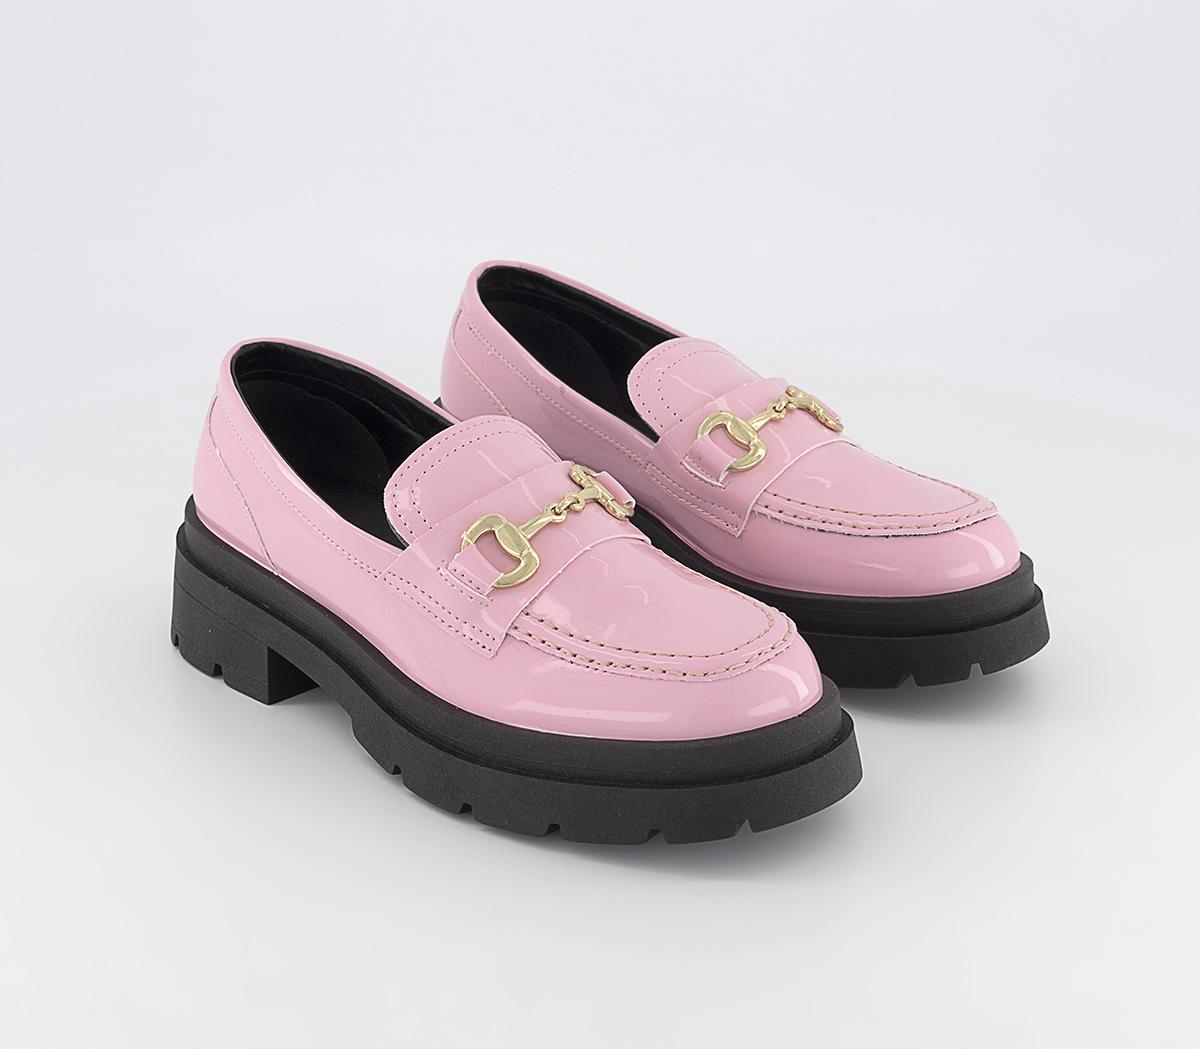 OFFICE Womens Frenchie Patent Snaffle Chunkly Loafers Pink Patent, 4